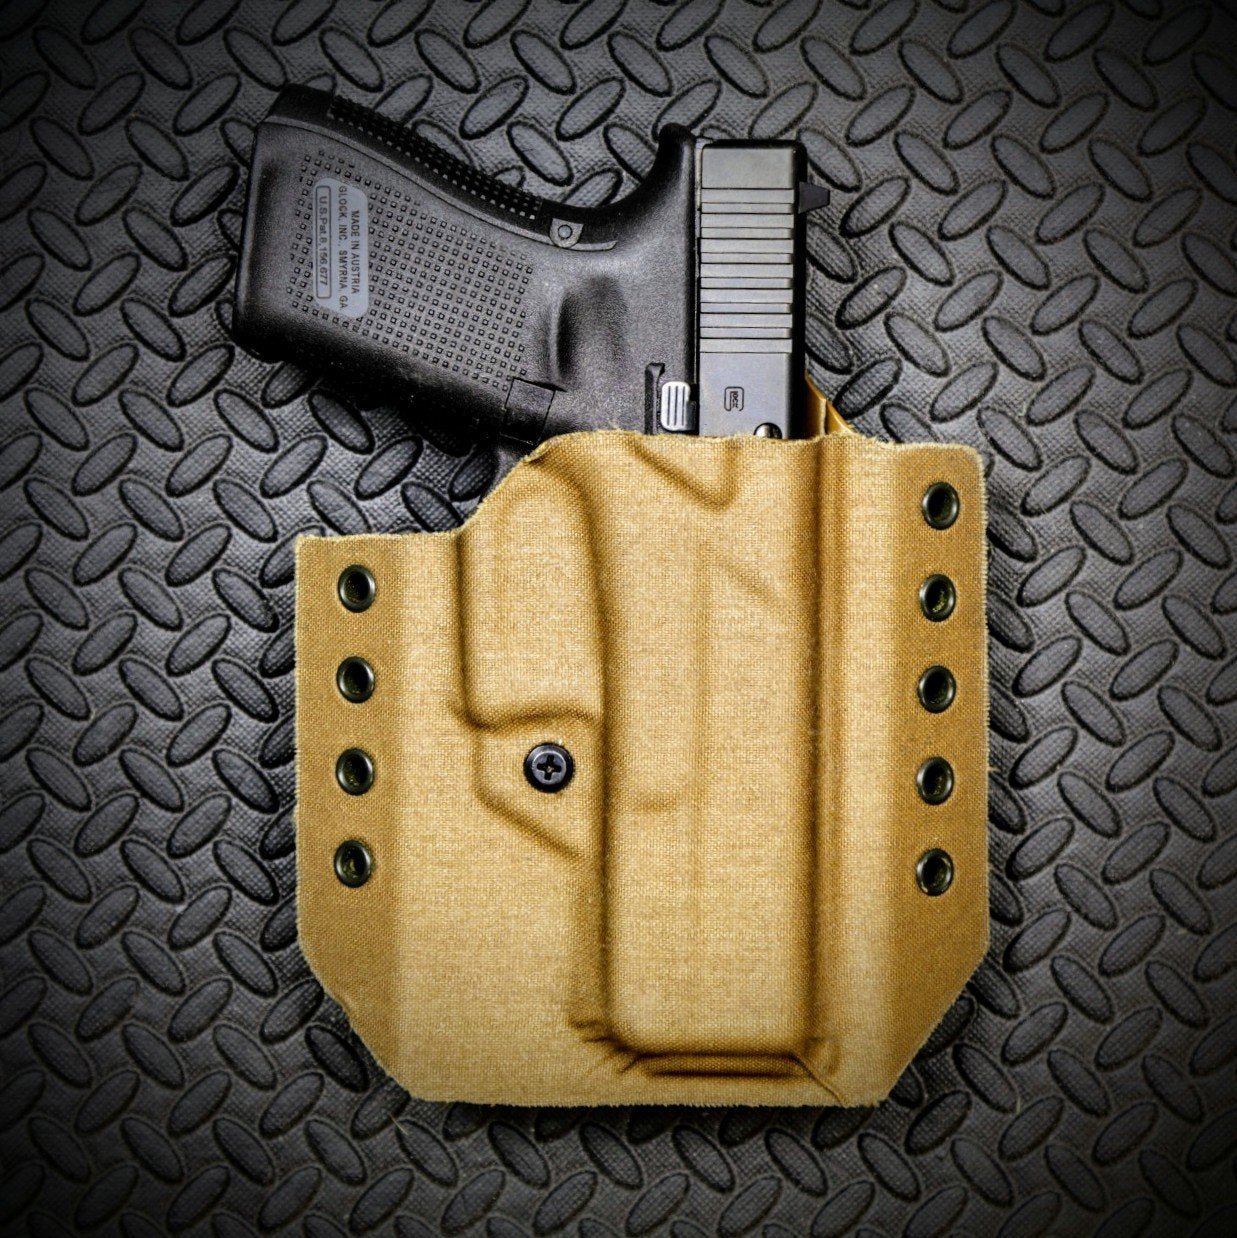 React RC-T Protector OWB Holster Kydex Holsters and Mag Pouches